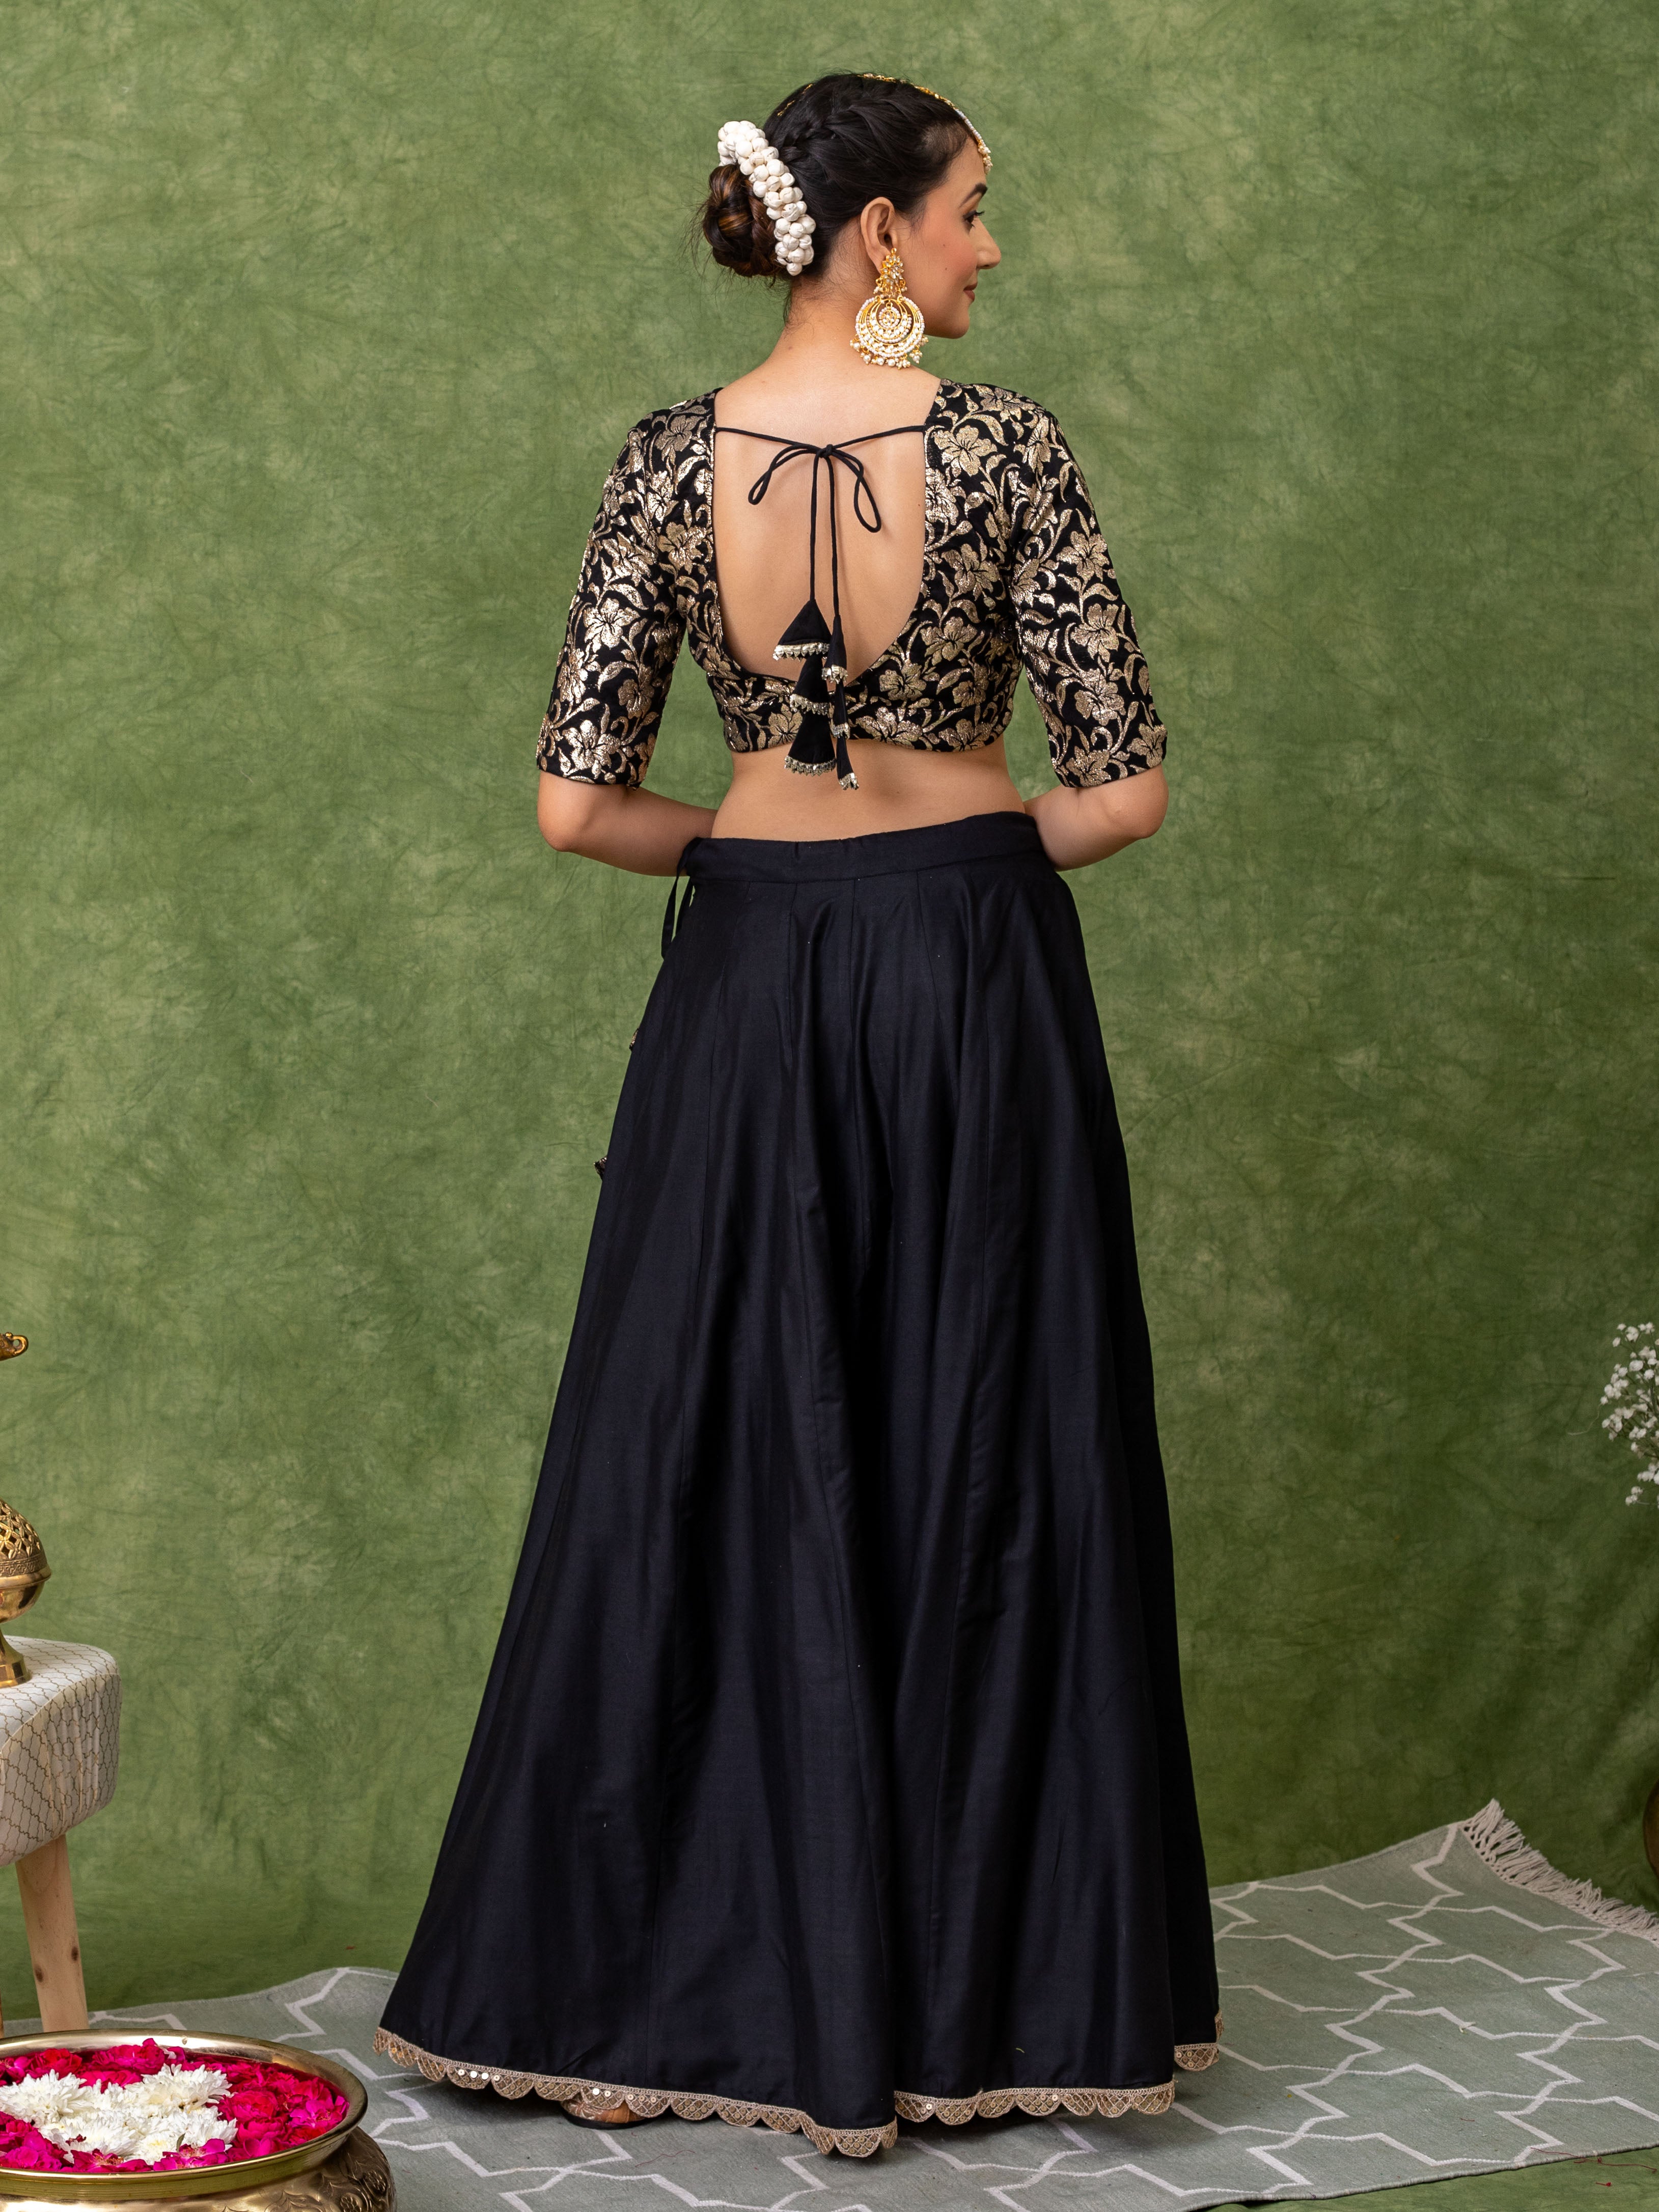 Lehenga set in black with floral Jacquard jaal on the blouse